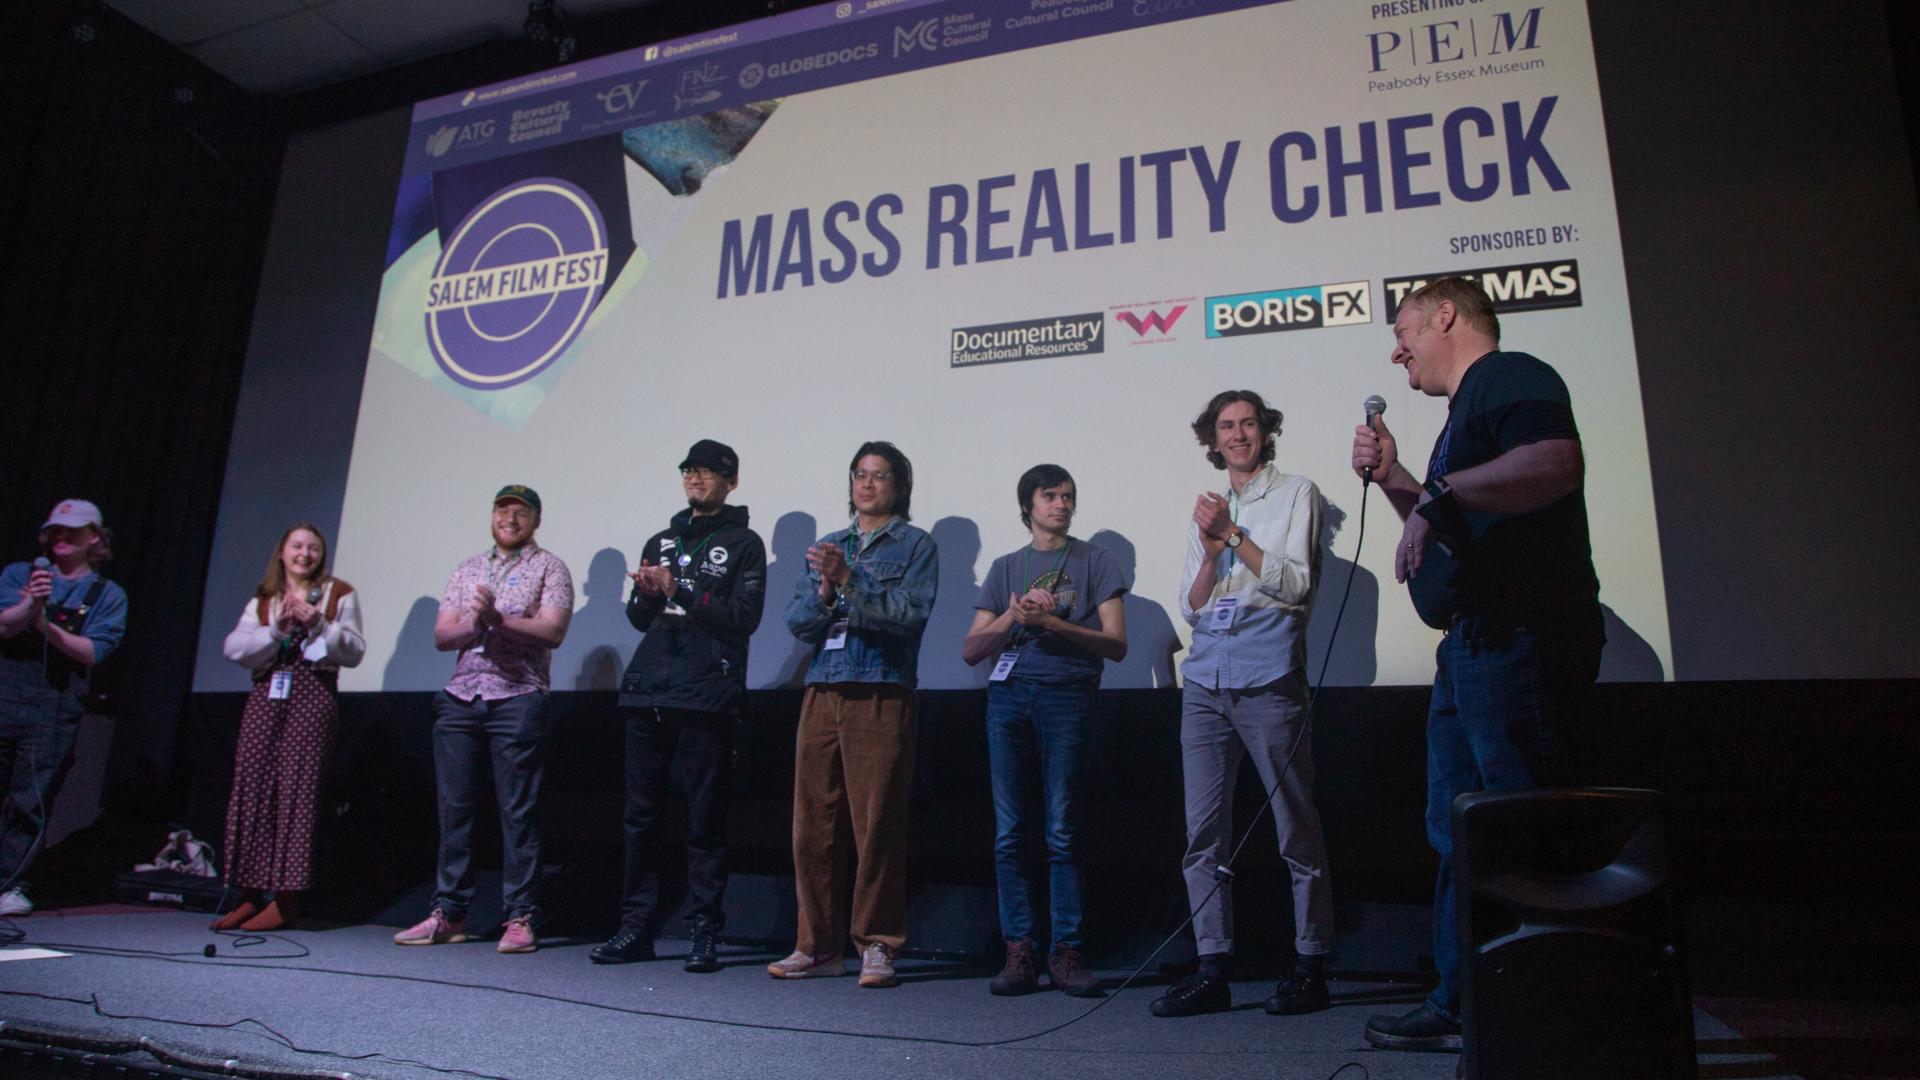 MASS REALITY CHECK - College Doc Shorts